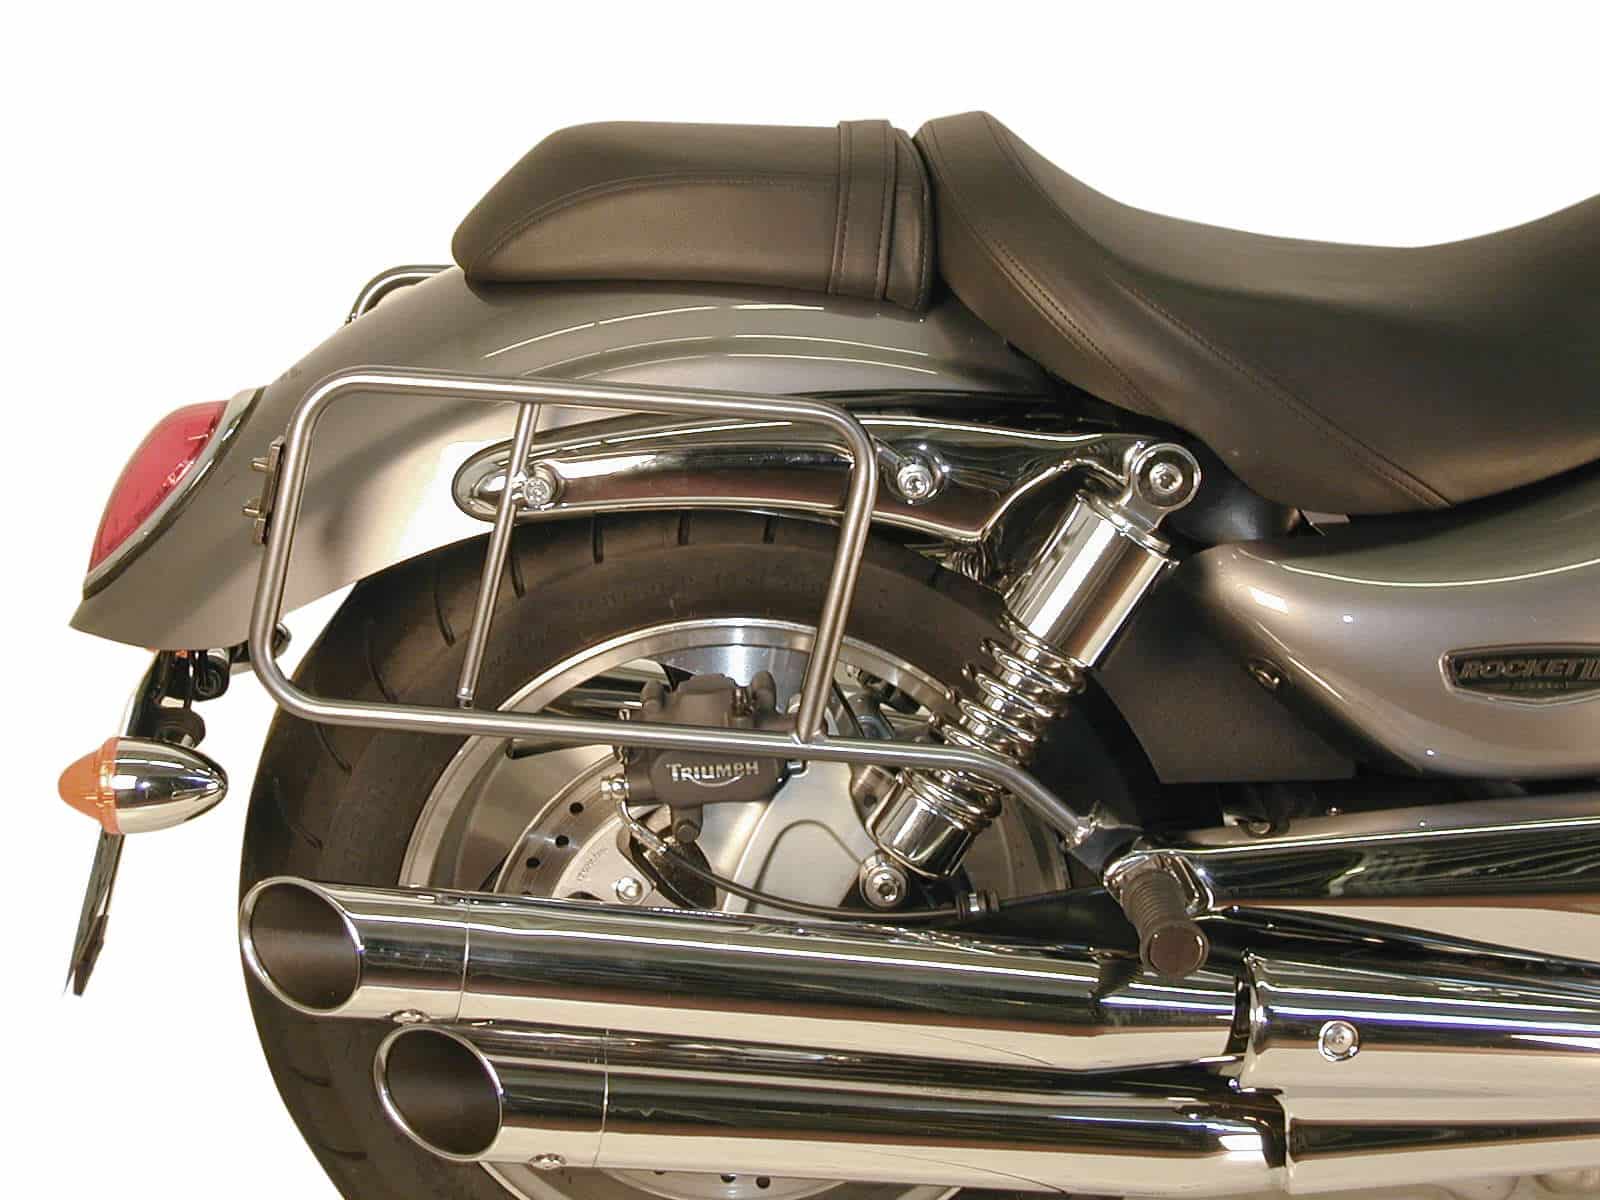 Sidecarrier permanent mounted chrome for Triumph Rocket III (2004-2009)